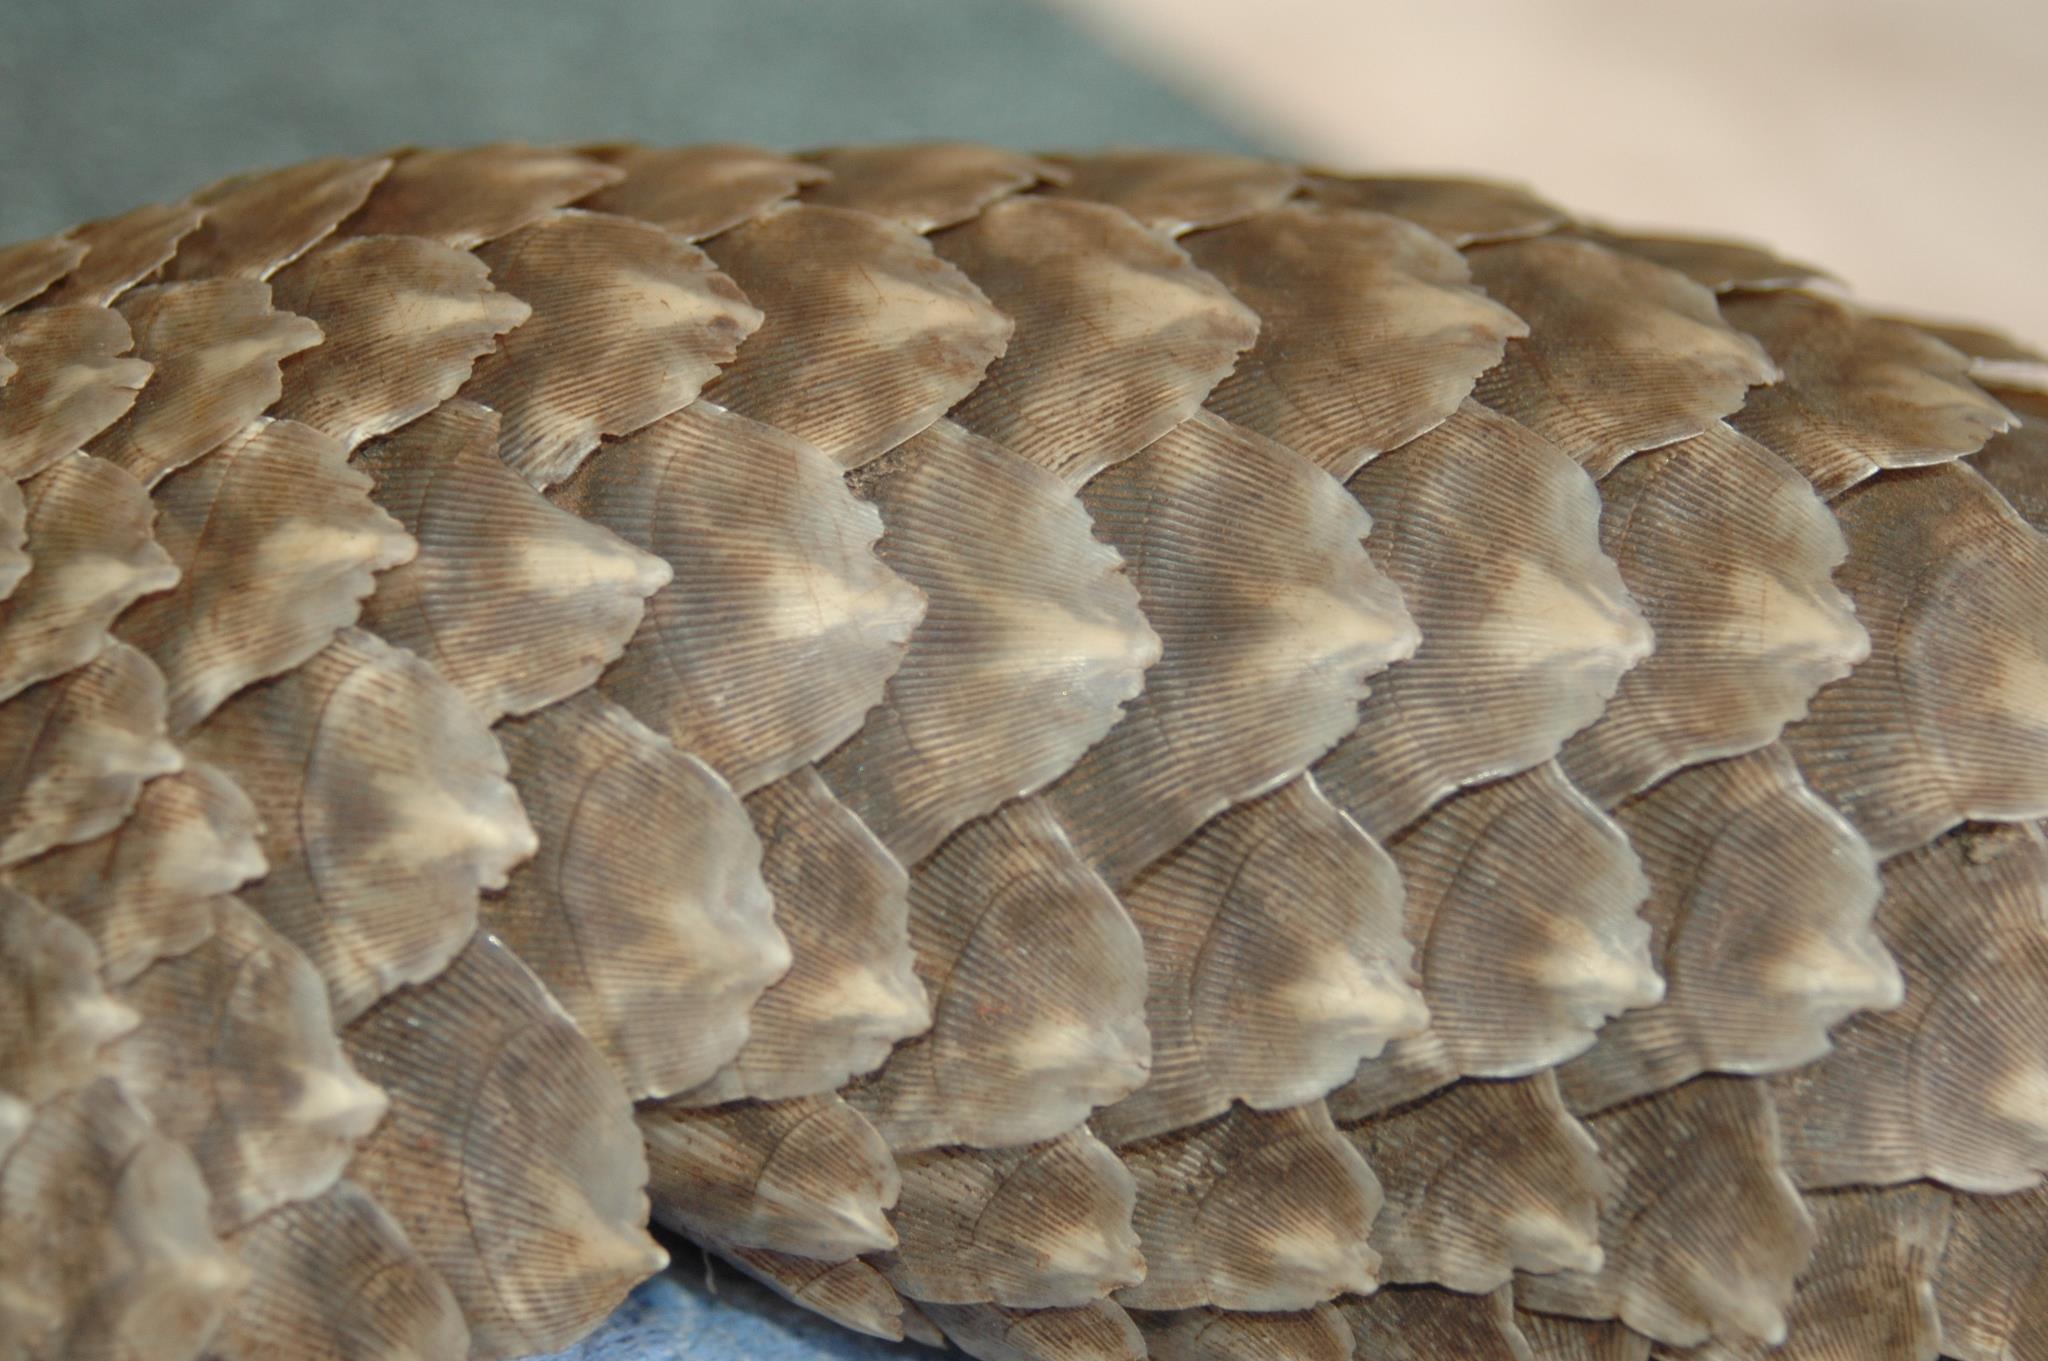 A close up of the scales. Image courtesy of Tikki Hywood Trust.